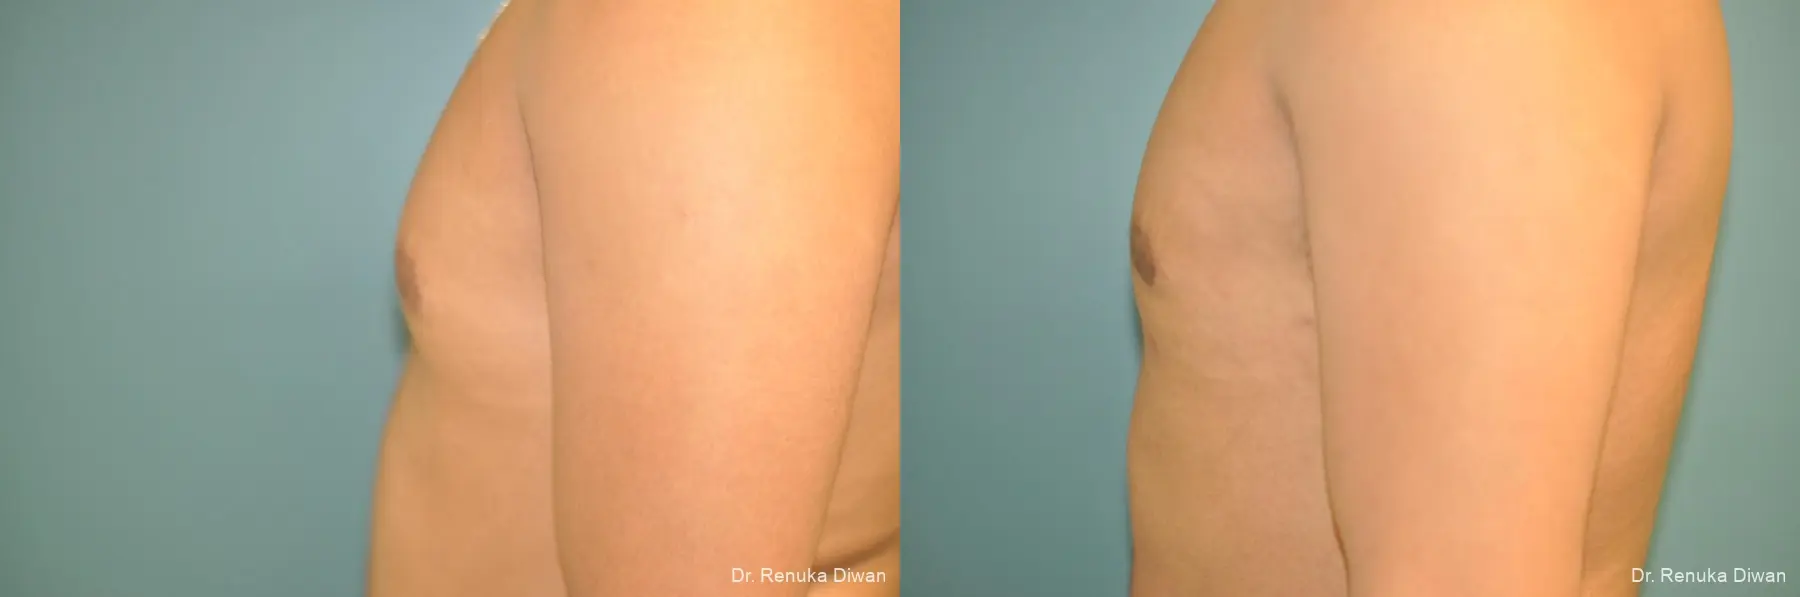 Liposuction For Men: Patient 2 - Before and After 1